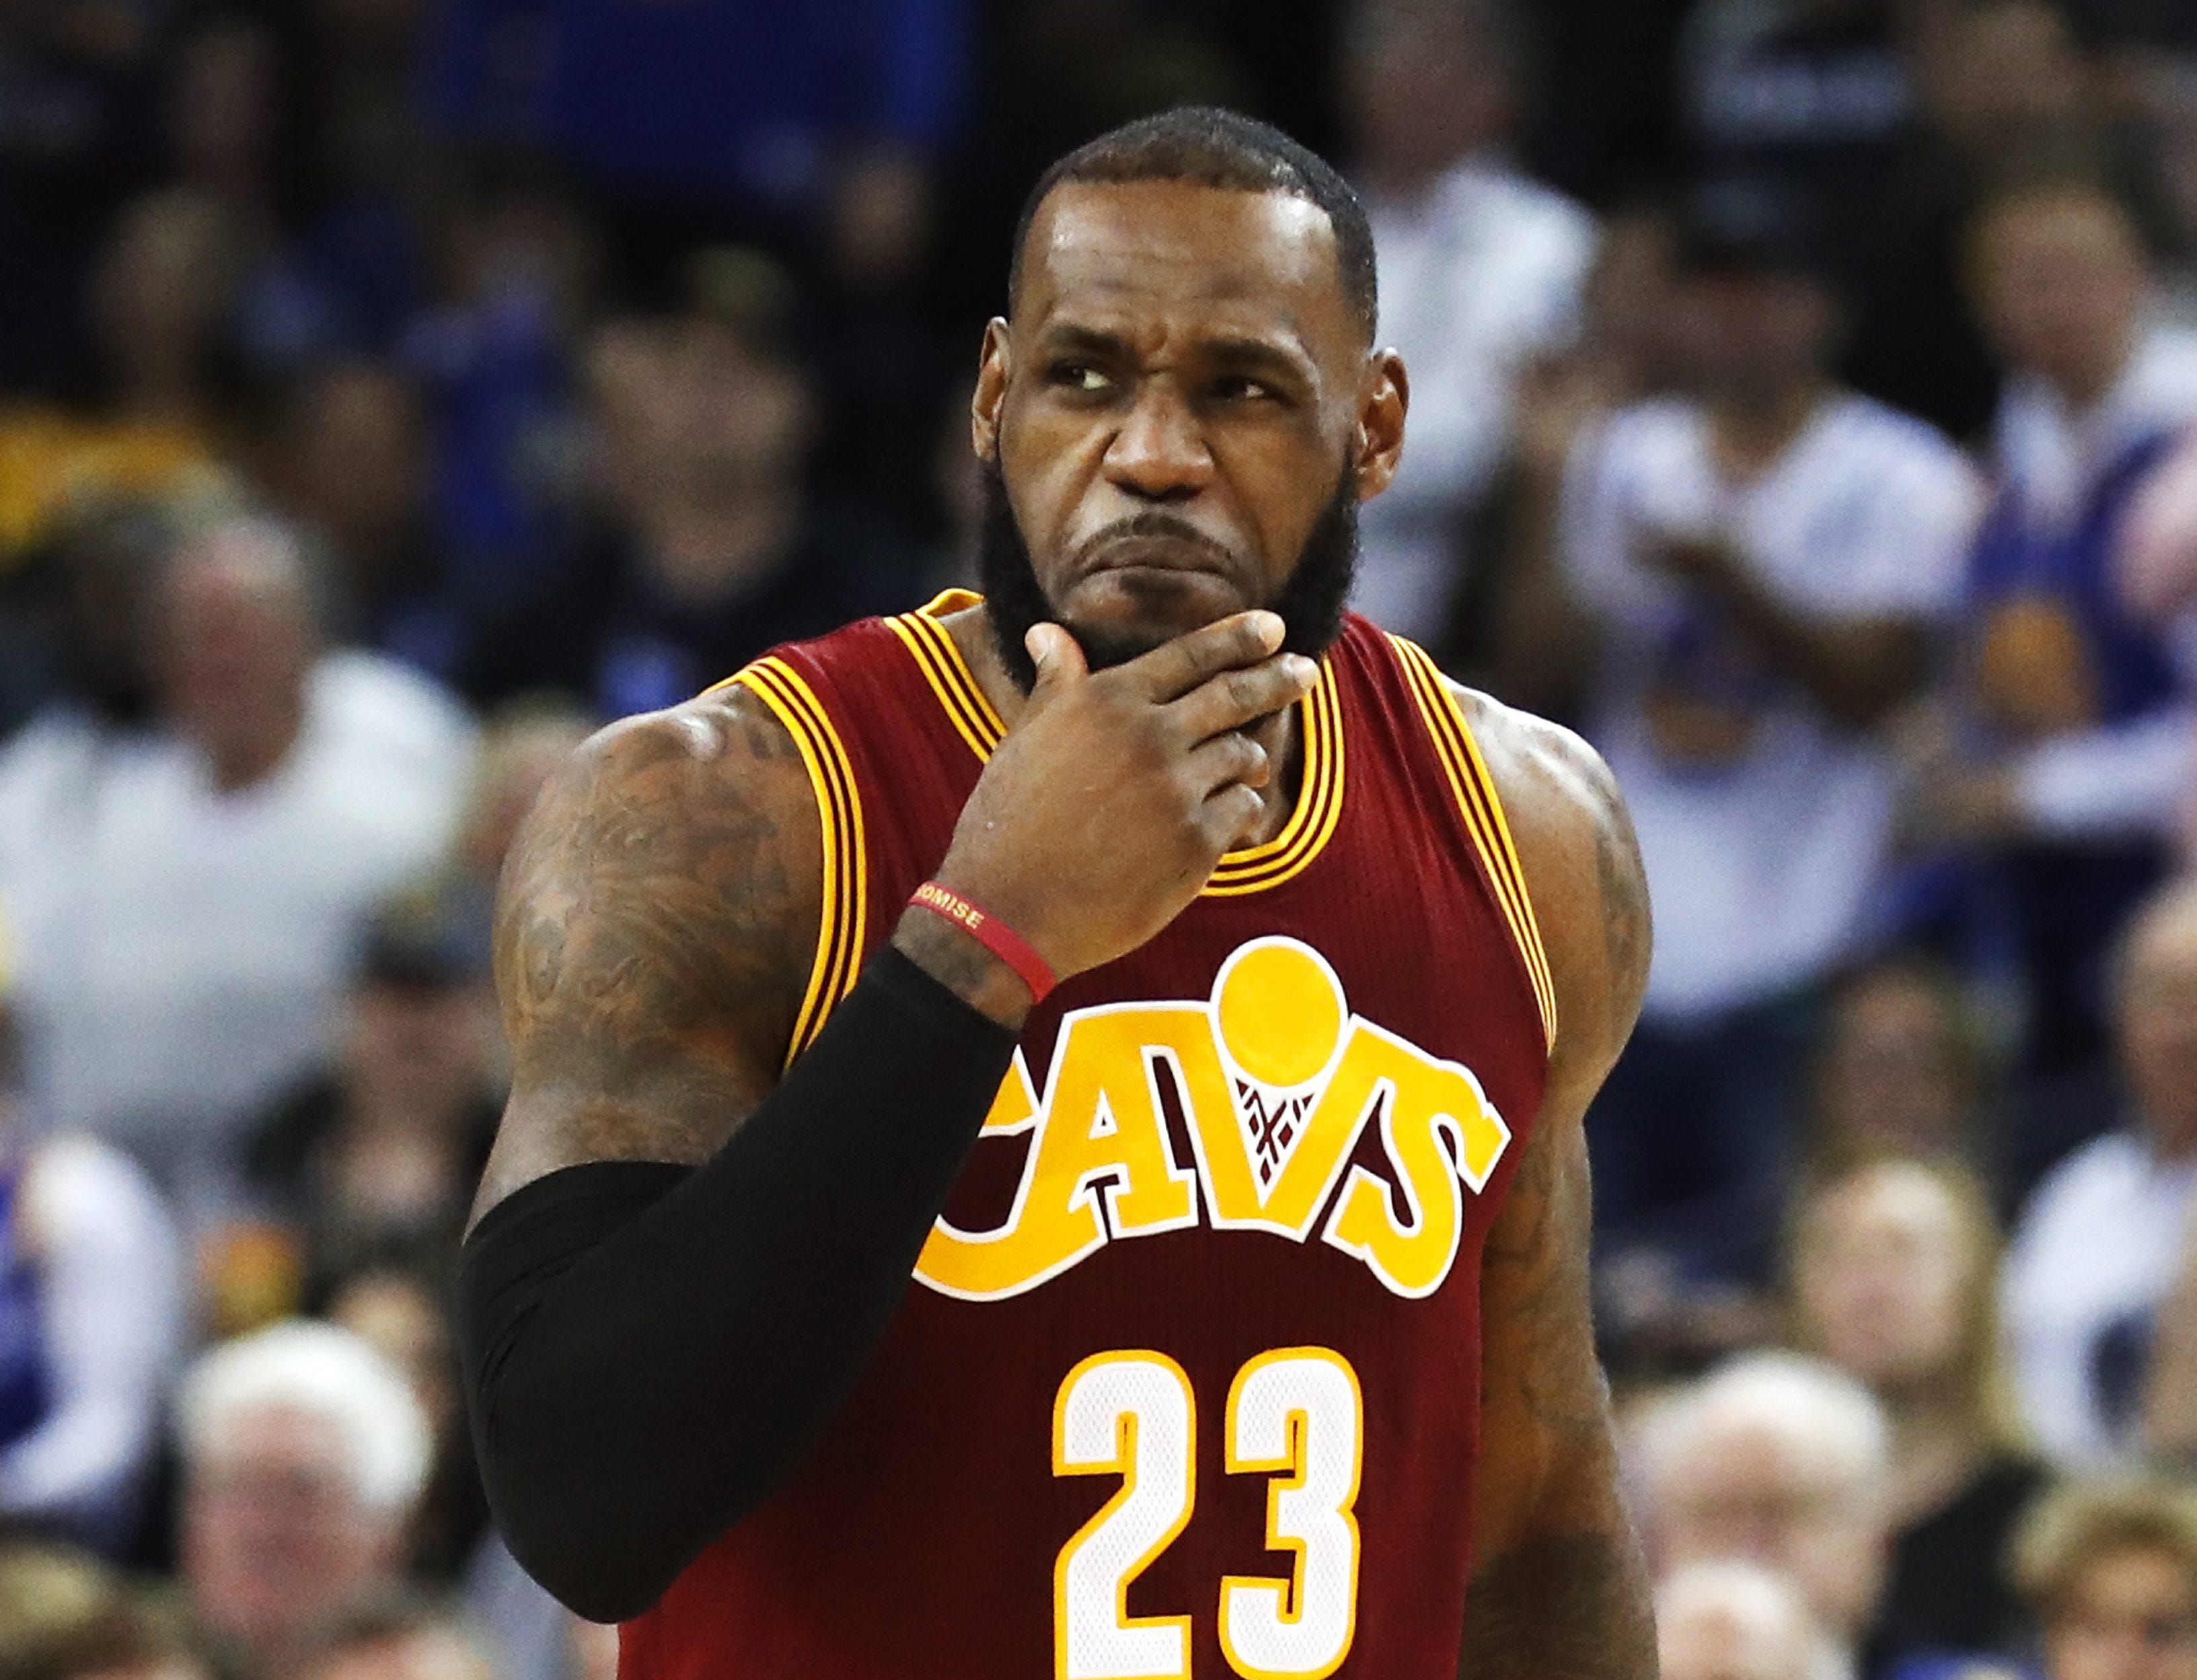 LeBron appears to taunt GSW fans by counting rings